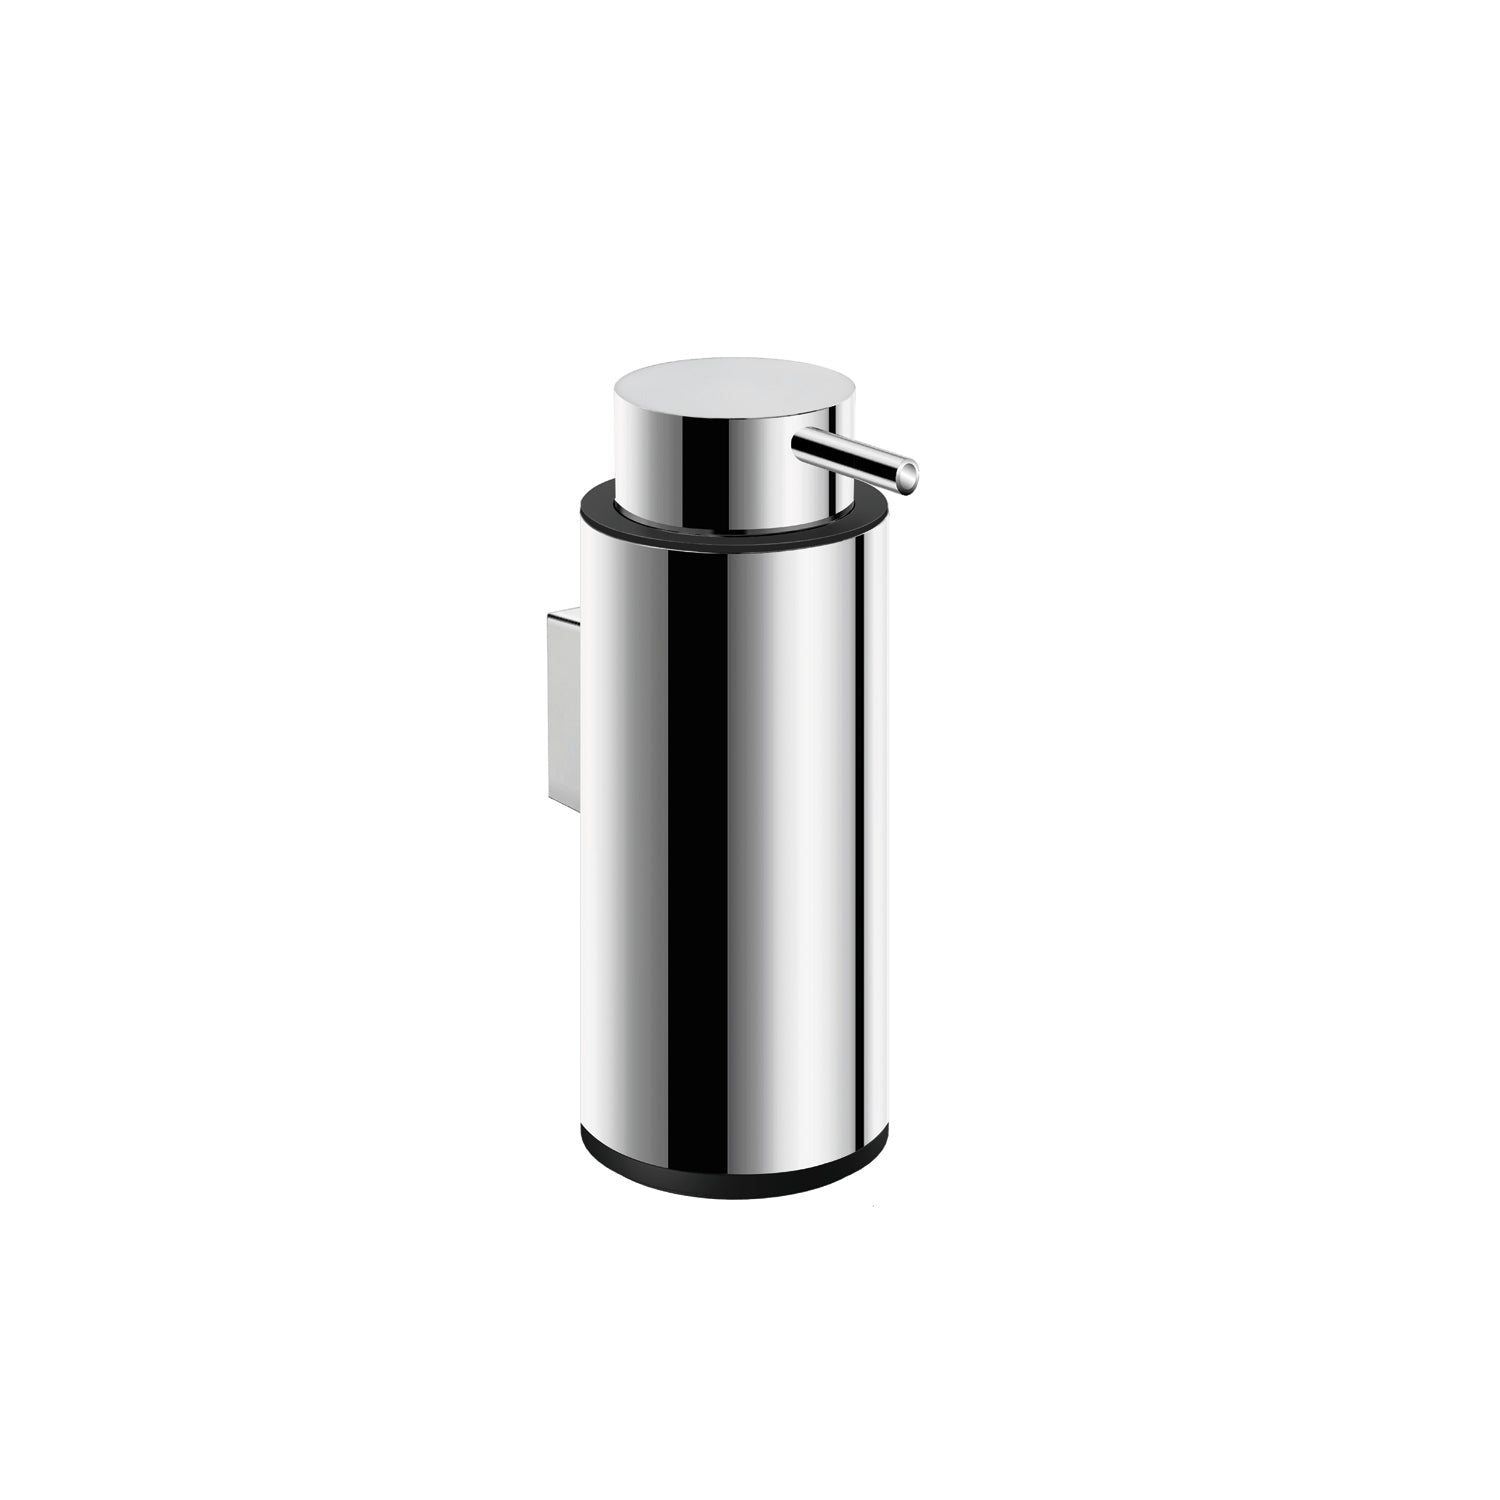 COSMIC Logic Soap Dispenser, Wall Mount, Stainless Steel Body, Chrome Finish, 2-3/8 x 6-1/2 x 2-3/8 Inches (2260304)